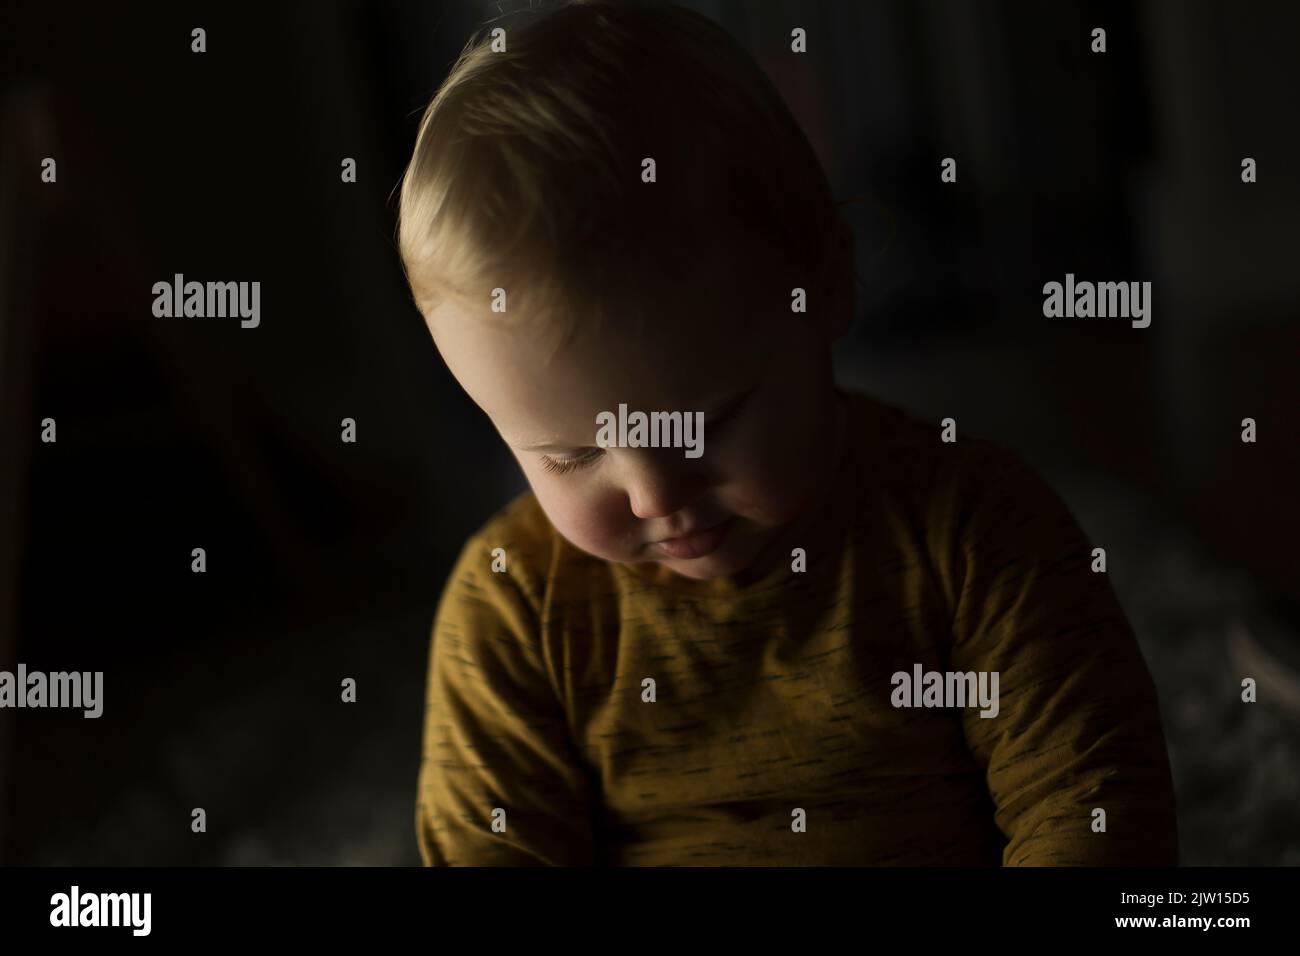 Young toddler looking downwards in a dark room, studio light used. Stock Photo